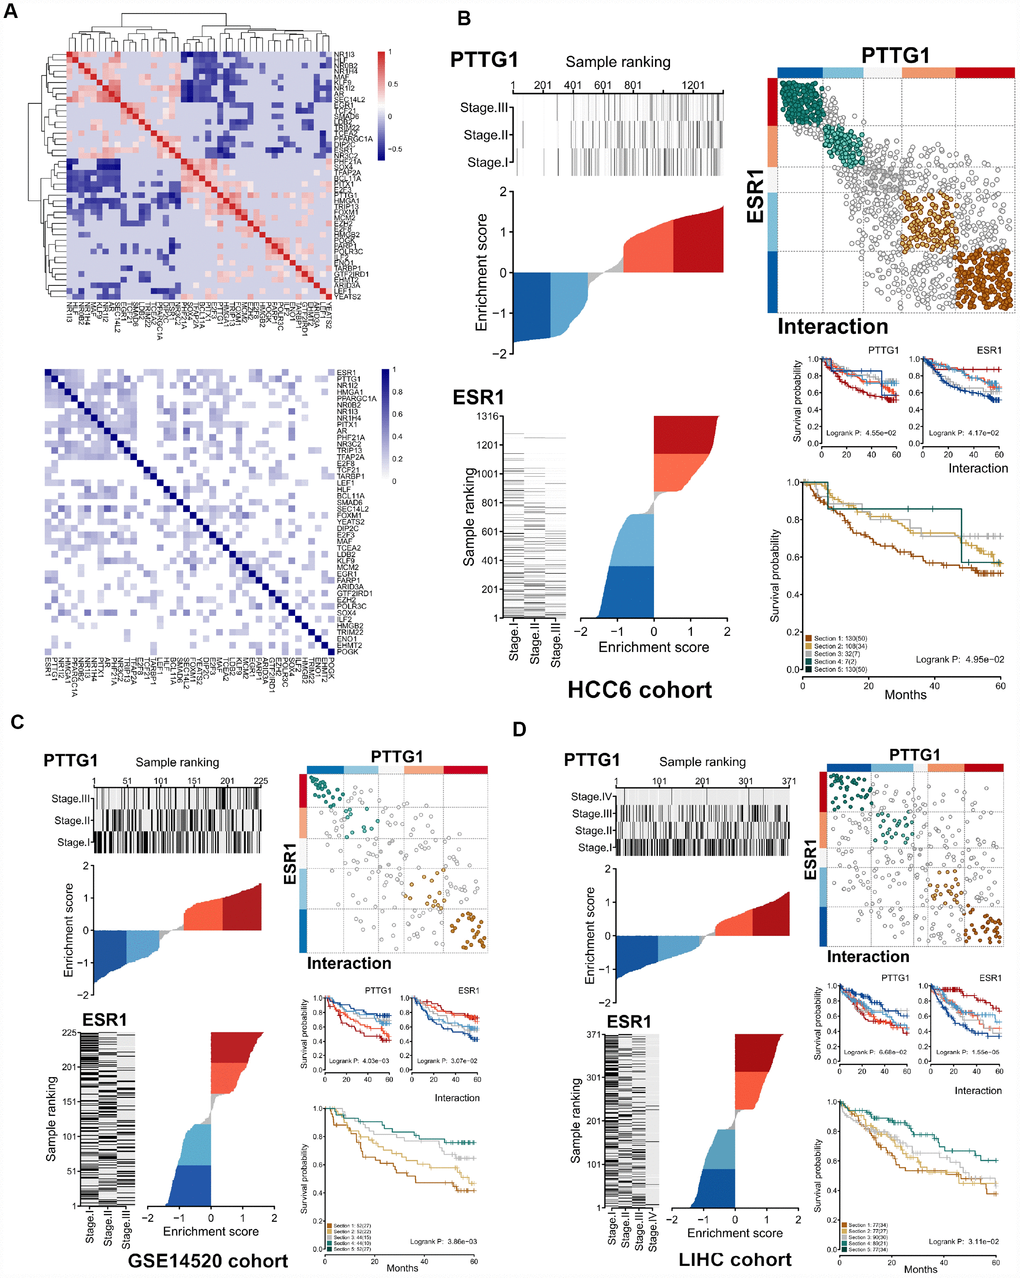 Differential expression effects of MR interactions on shared target genes. (A) Upper panel: Heatmap of gene expression correlation for targets shared by the 44 MRs (HCC6). Lower panel: Hierarchical clustering based on jaccard similarity coefficients (shades of blue) computed among 44 regulons. (B) Interaction of ESR1-PTTG1 pair in the HCC6 cohort. The dES of ESR1 and PTTG1 are shown. On the right upper panel, a cartoon depicts the observed interactions between ESR1 and PTTG1 targets, with brown circles indicating co-activation, and green circles denoting co-repression. Targets are shown in grey if the two MRs have opposing effects. Assuming ESR1 and PTTG1 interaction, survival outcomes for the ESR1 regulon, the PTTG1 regulon, and both interacting regulons are depicted (C, D).